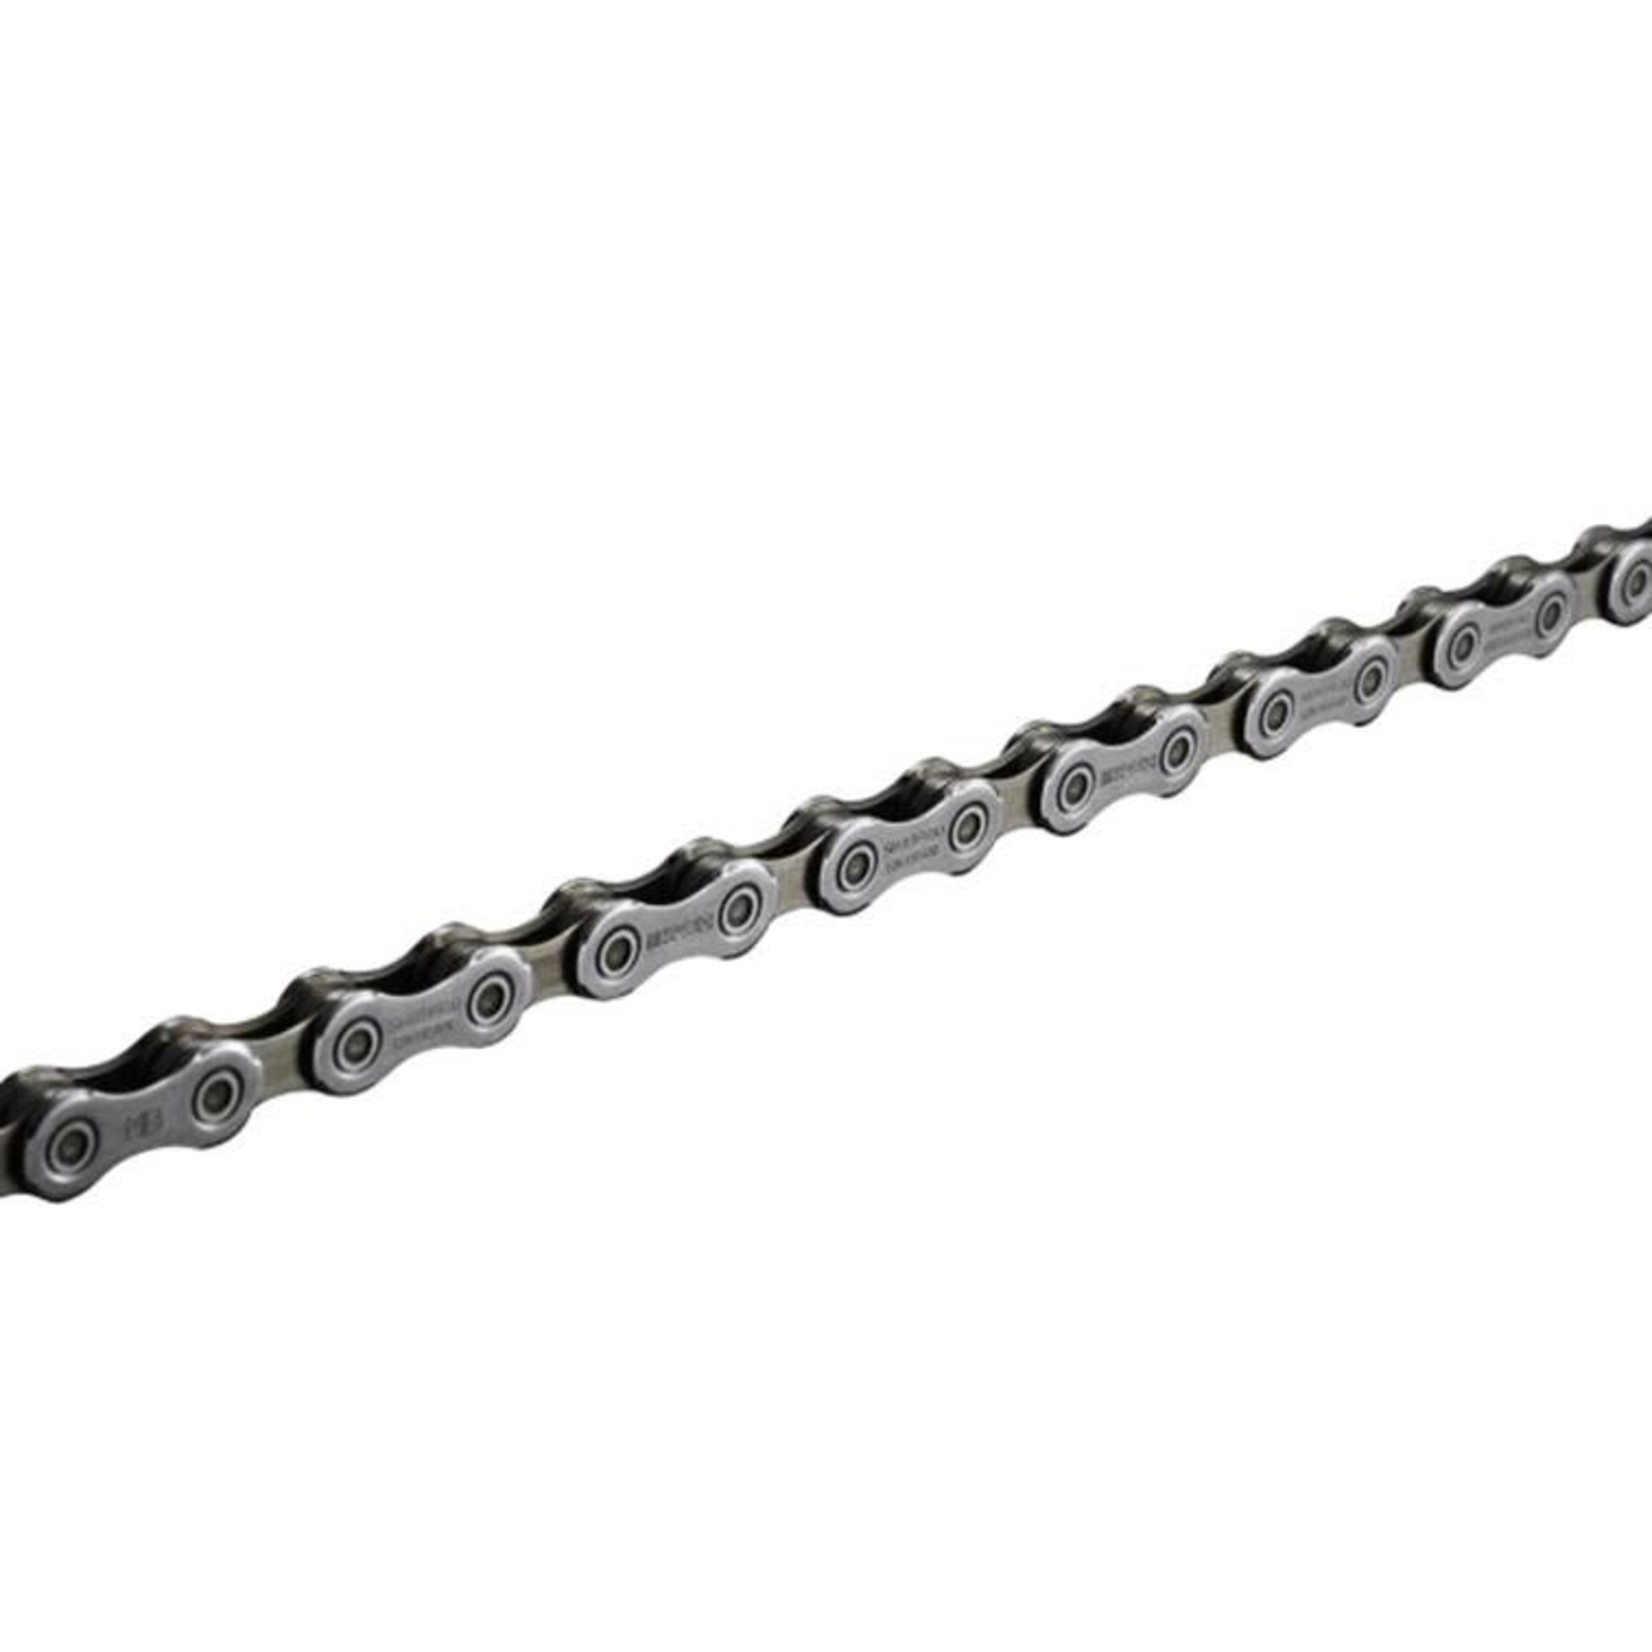 Shimano CN-HG601 105/SLX 11 Speed Chain with QLink